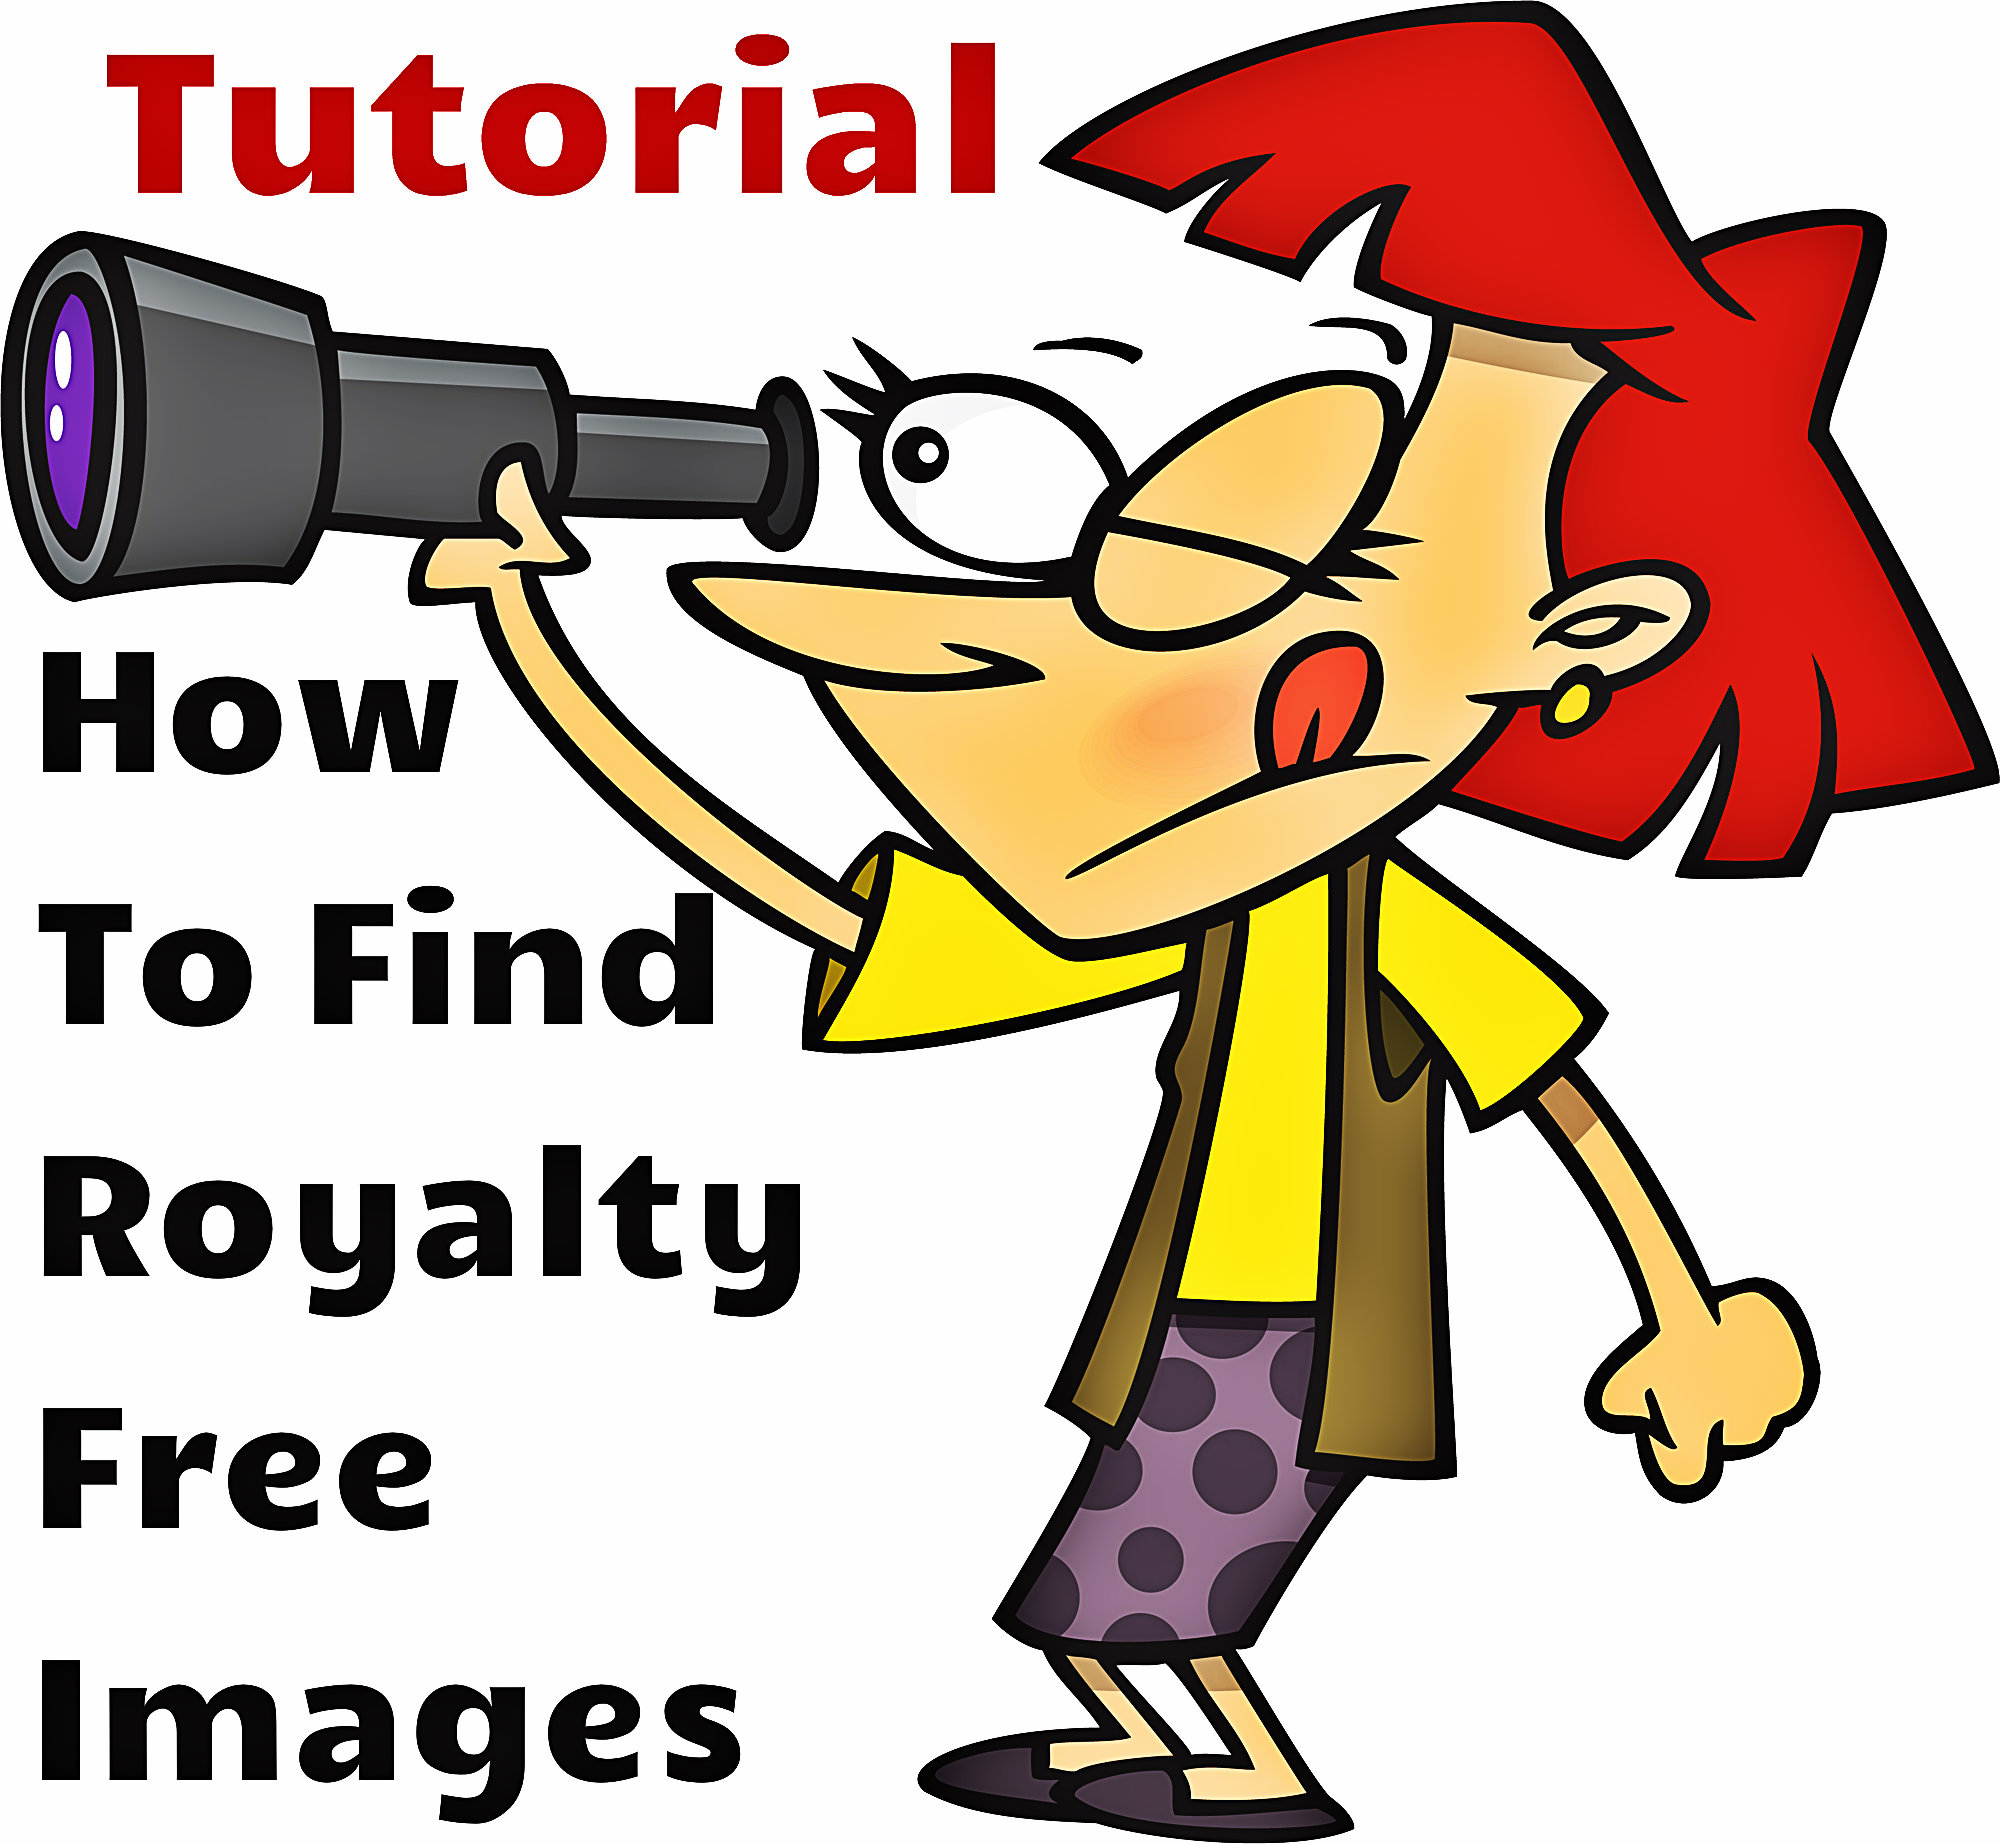 royalty free clipart sites - photo #2